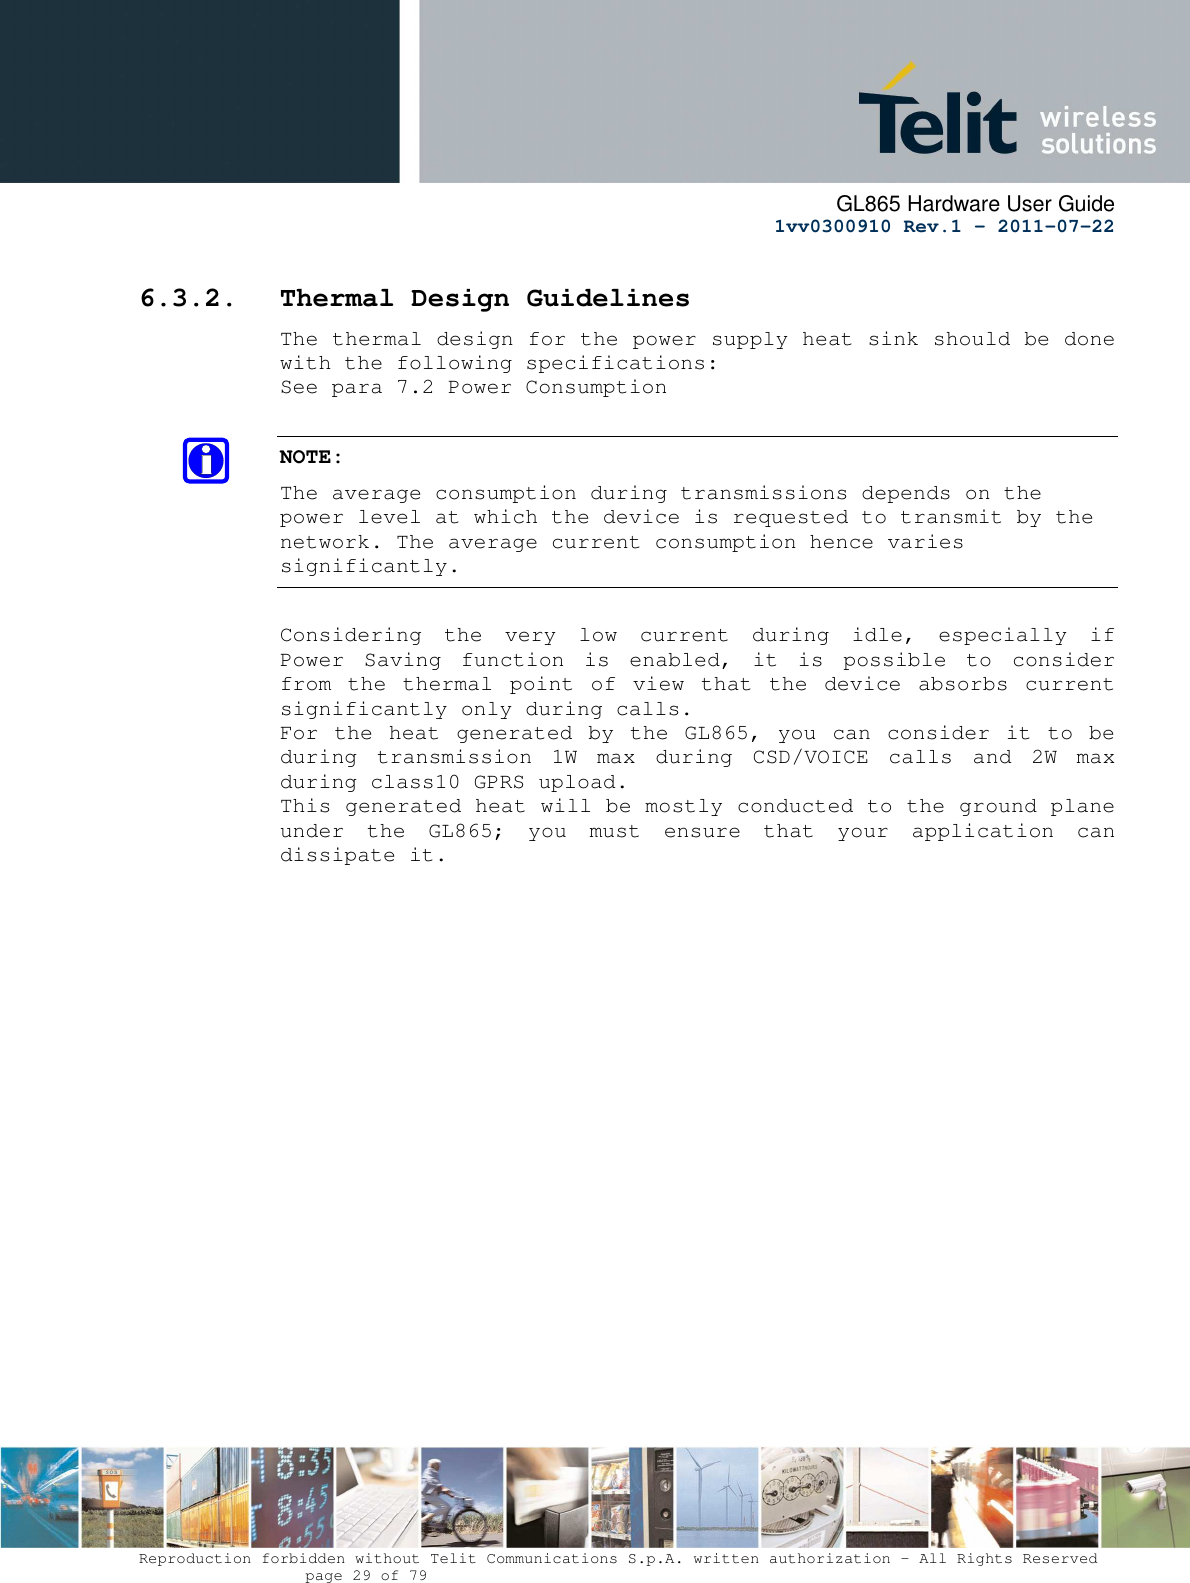      GL865 Hardware User Guide     1vv0300910 Rev.1 – 2011-07-22       Reproduction forbidden without Telit Communications S.p.A. written authorization - All Rights Reserved    page 29 of 79  6.3.2. Thermal Design Guidelines The thermal design for the power supply heat sink should be done with the following specifications: See para 7.2 Power Consumption  NOTE: The average consumption during transmissions depends on the power level at which the device is requested to transmit by the network. The average current consumption hence varies significantly.  Considering  the  very  low  current  during  idle,  especially  if Power  Saving  function  is  enabled,  it  is  possible  to  consider from  the  thermal  point  of  view  that  the  device  absorbs  current significantly only during calls.  For the  heat  generated by  the GL865, you can  consider it  to  be during  transmission  1W  max  during  CSD/VOICE  calls  and  2W  max during class10 GPRS upload.  This generated heat will be mostly conducted to the ground plane under  the  GL865;  you  must  ensure  that  your  application  can dissipate it.   